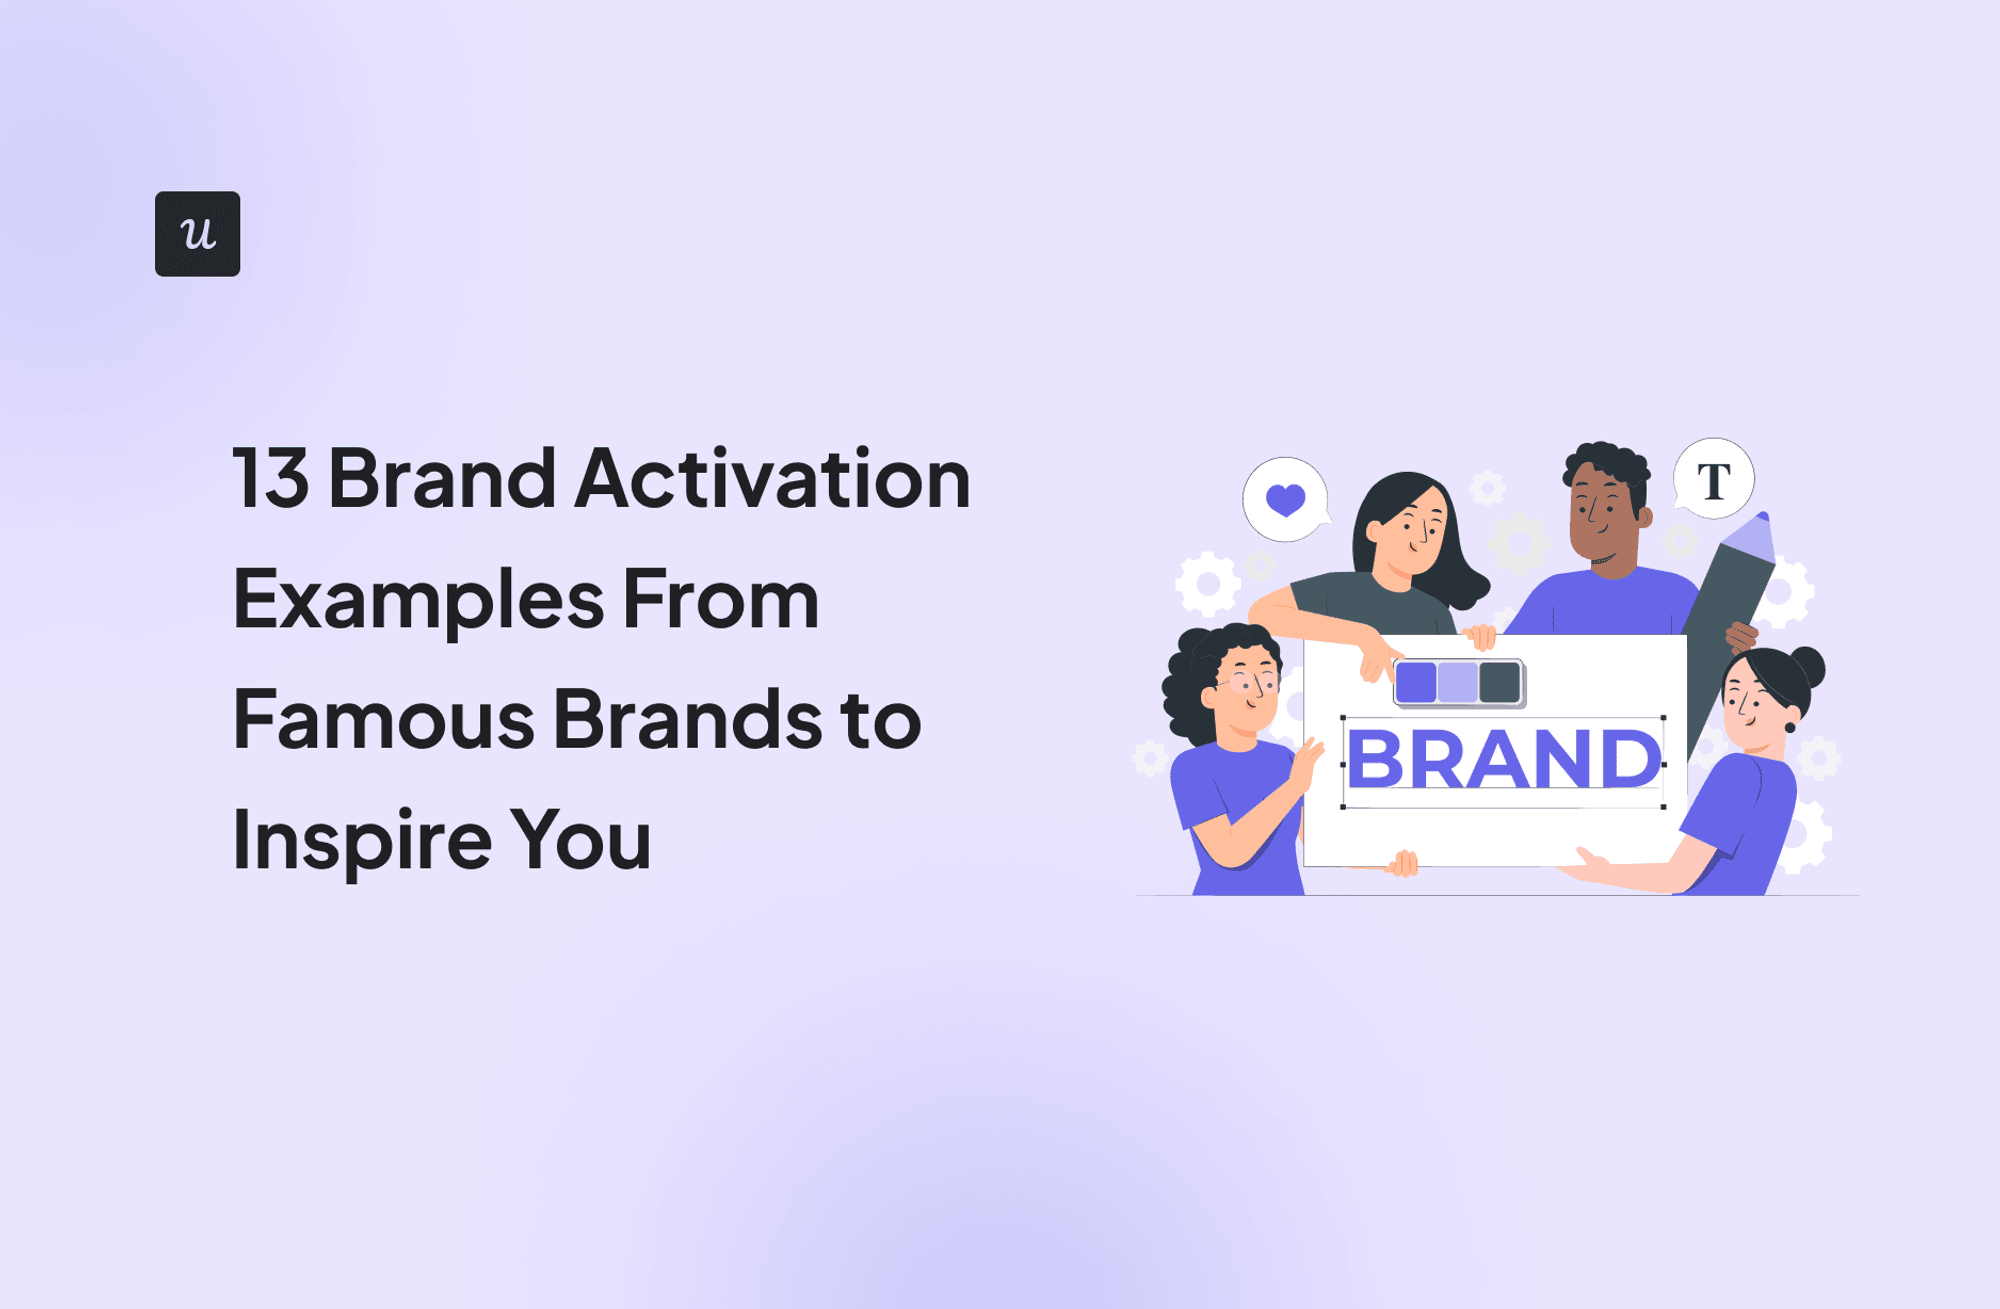 13 Brand Activation Examples From Famous Brands to Inspire You cover